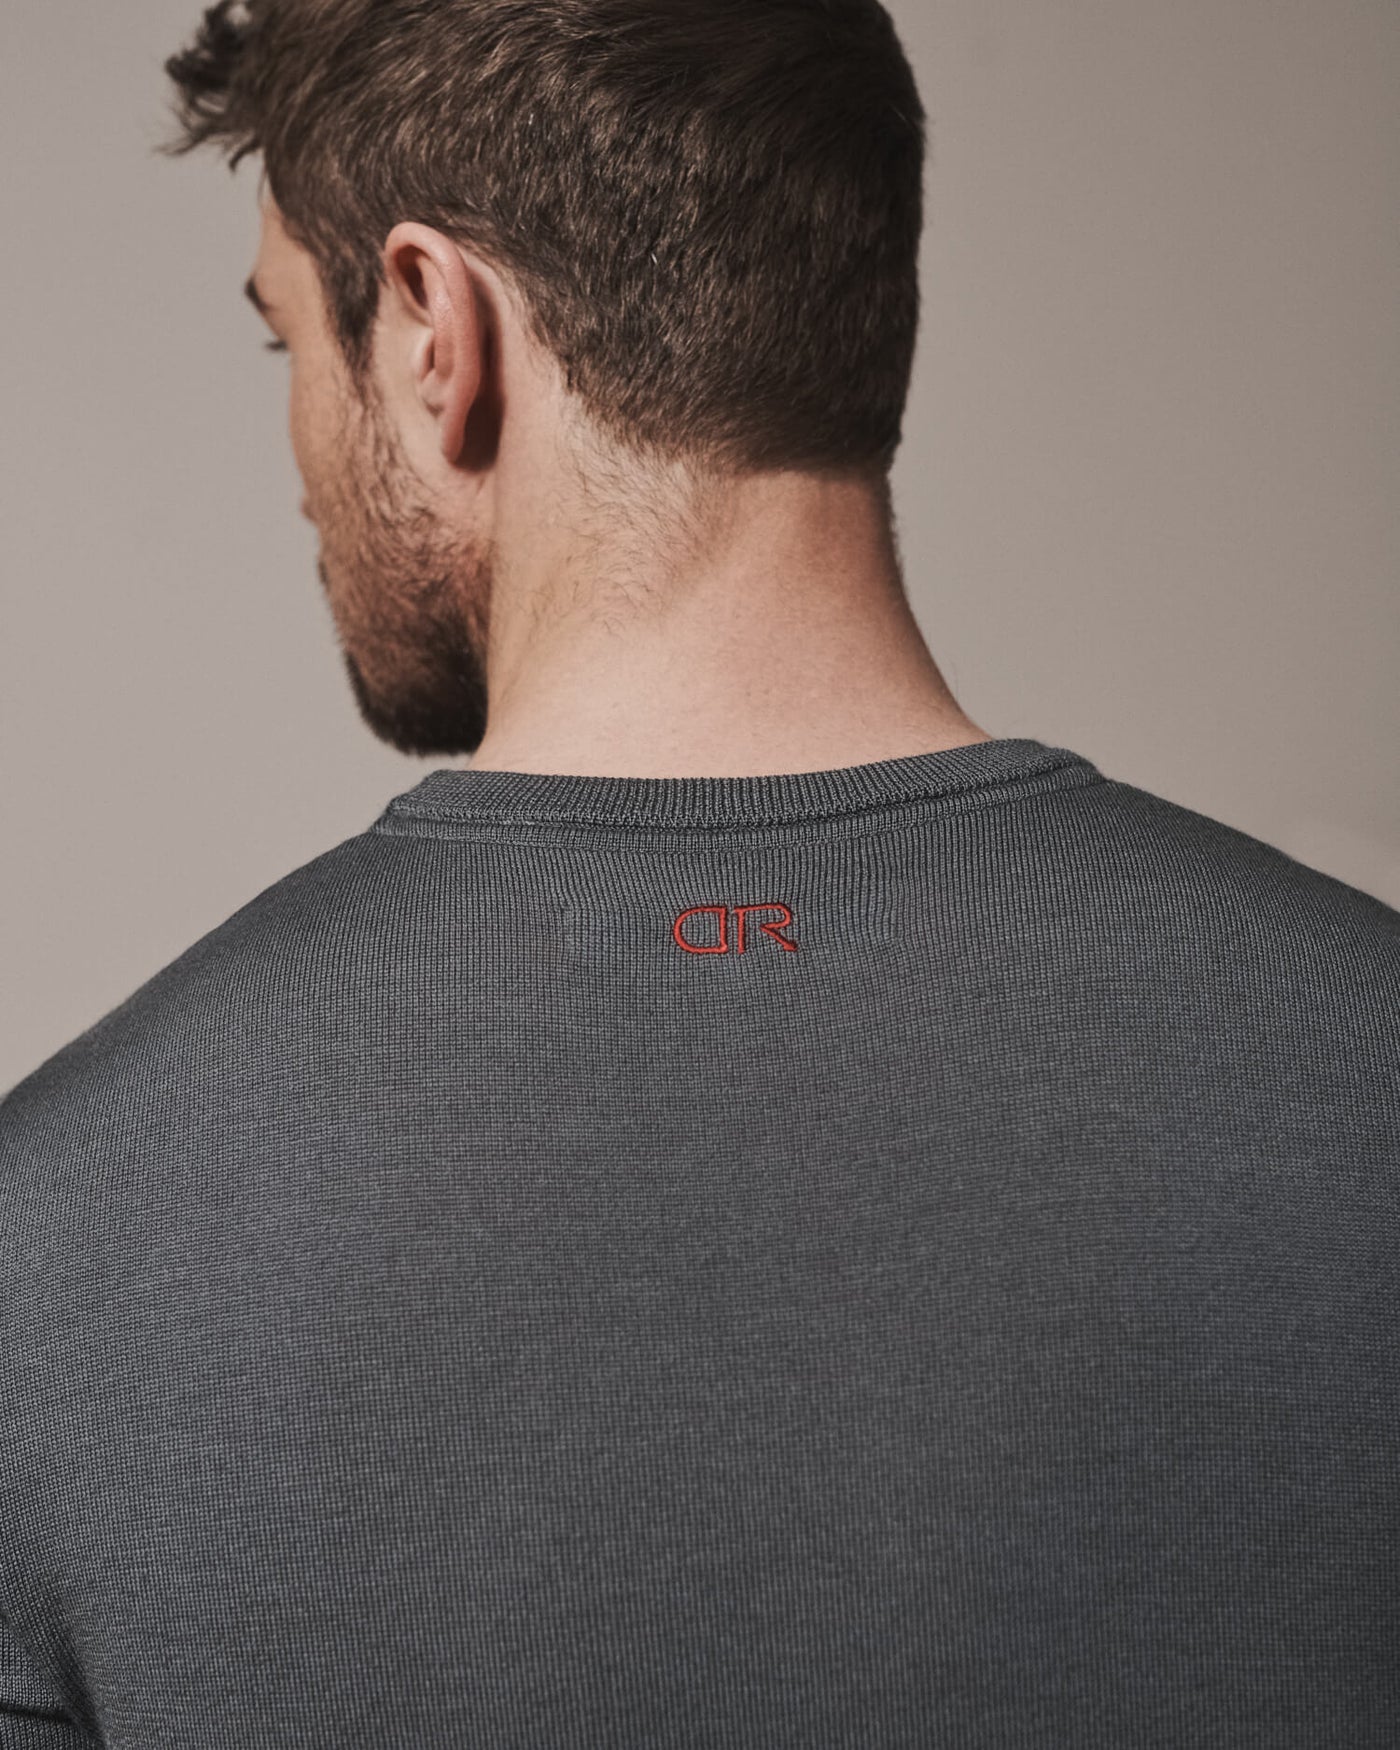 Our extra-fine merino wool crew neck jumpers for men and women in storm grey are made from a lightweight fabric and reactive natural fibre. Finished with our signature brand logo with red stitching. Ideal for layering under our waterproof dry robes for spectating touchdown sports or walking the dog.